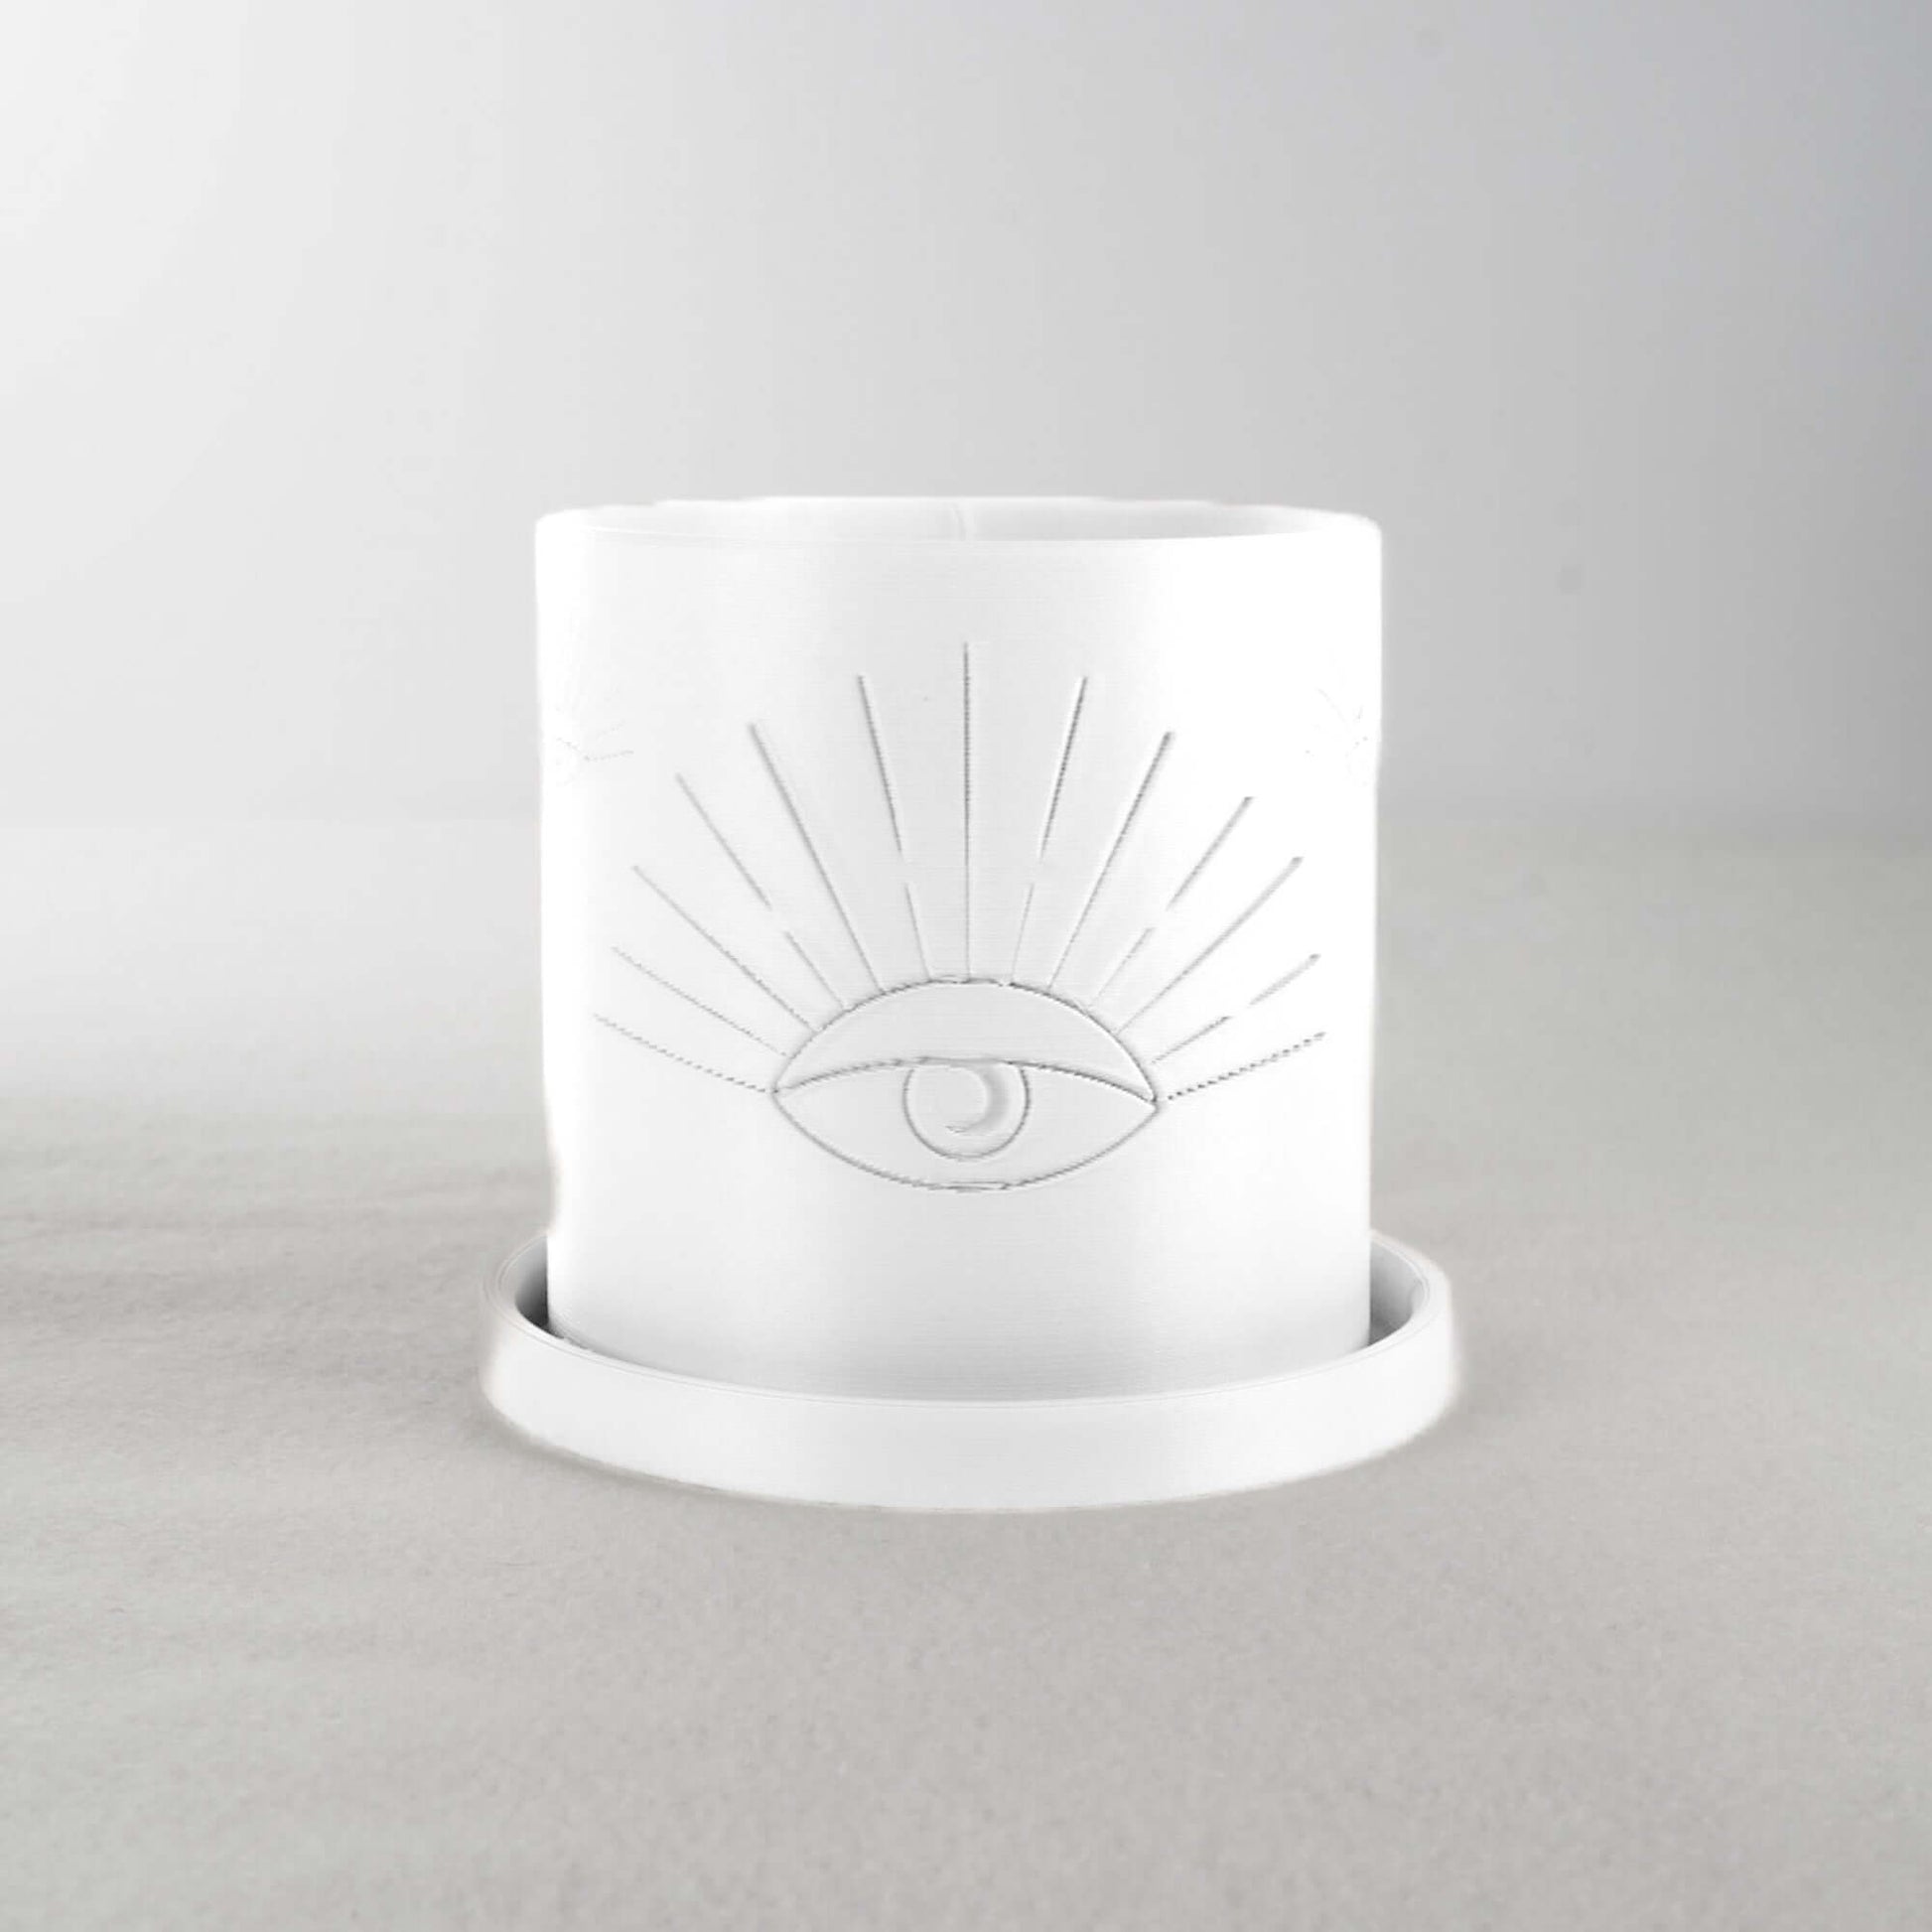 All-Seeing Eye Planter - Rosebud HomeGoods White 4 With Drip Tray MODERN HOME GOOD